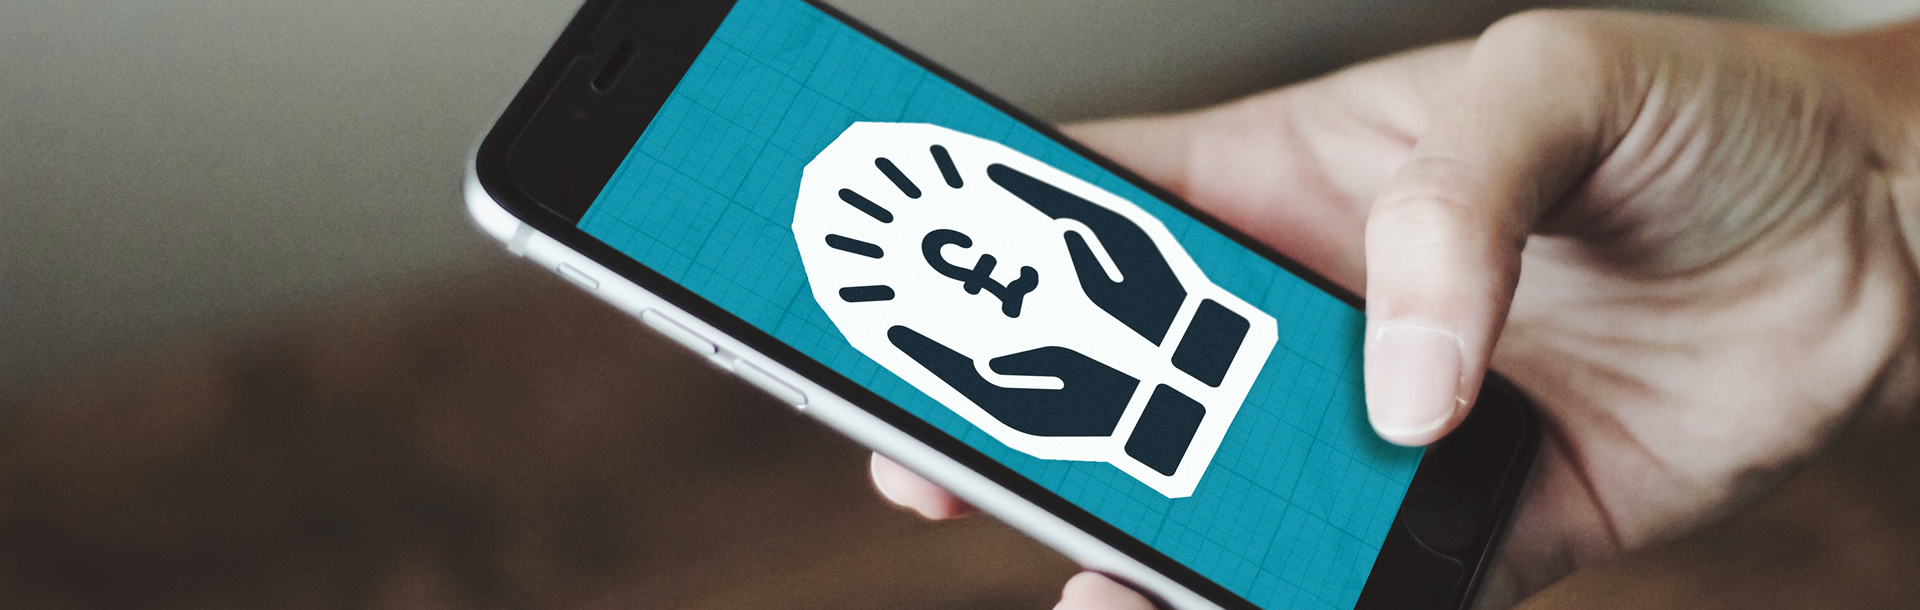 A mobile phone displaying an icon of hands holding a pound sign 